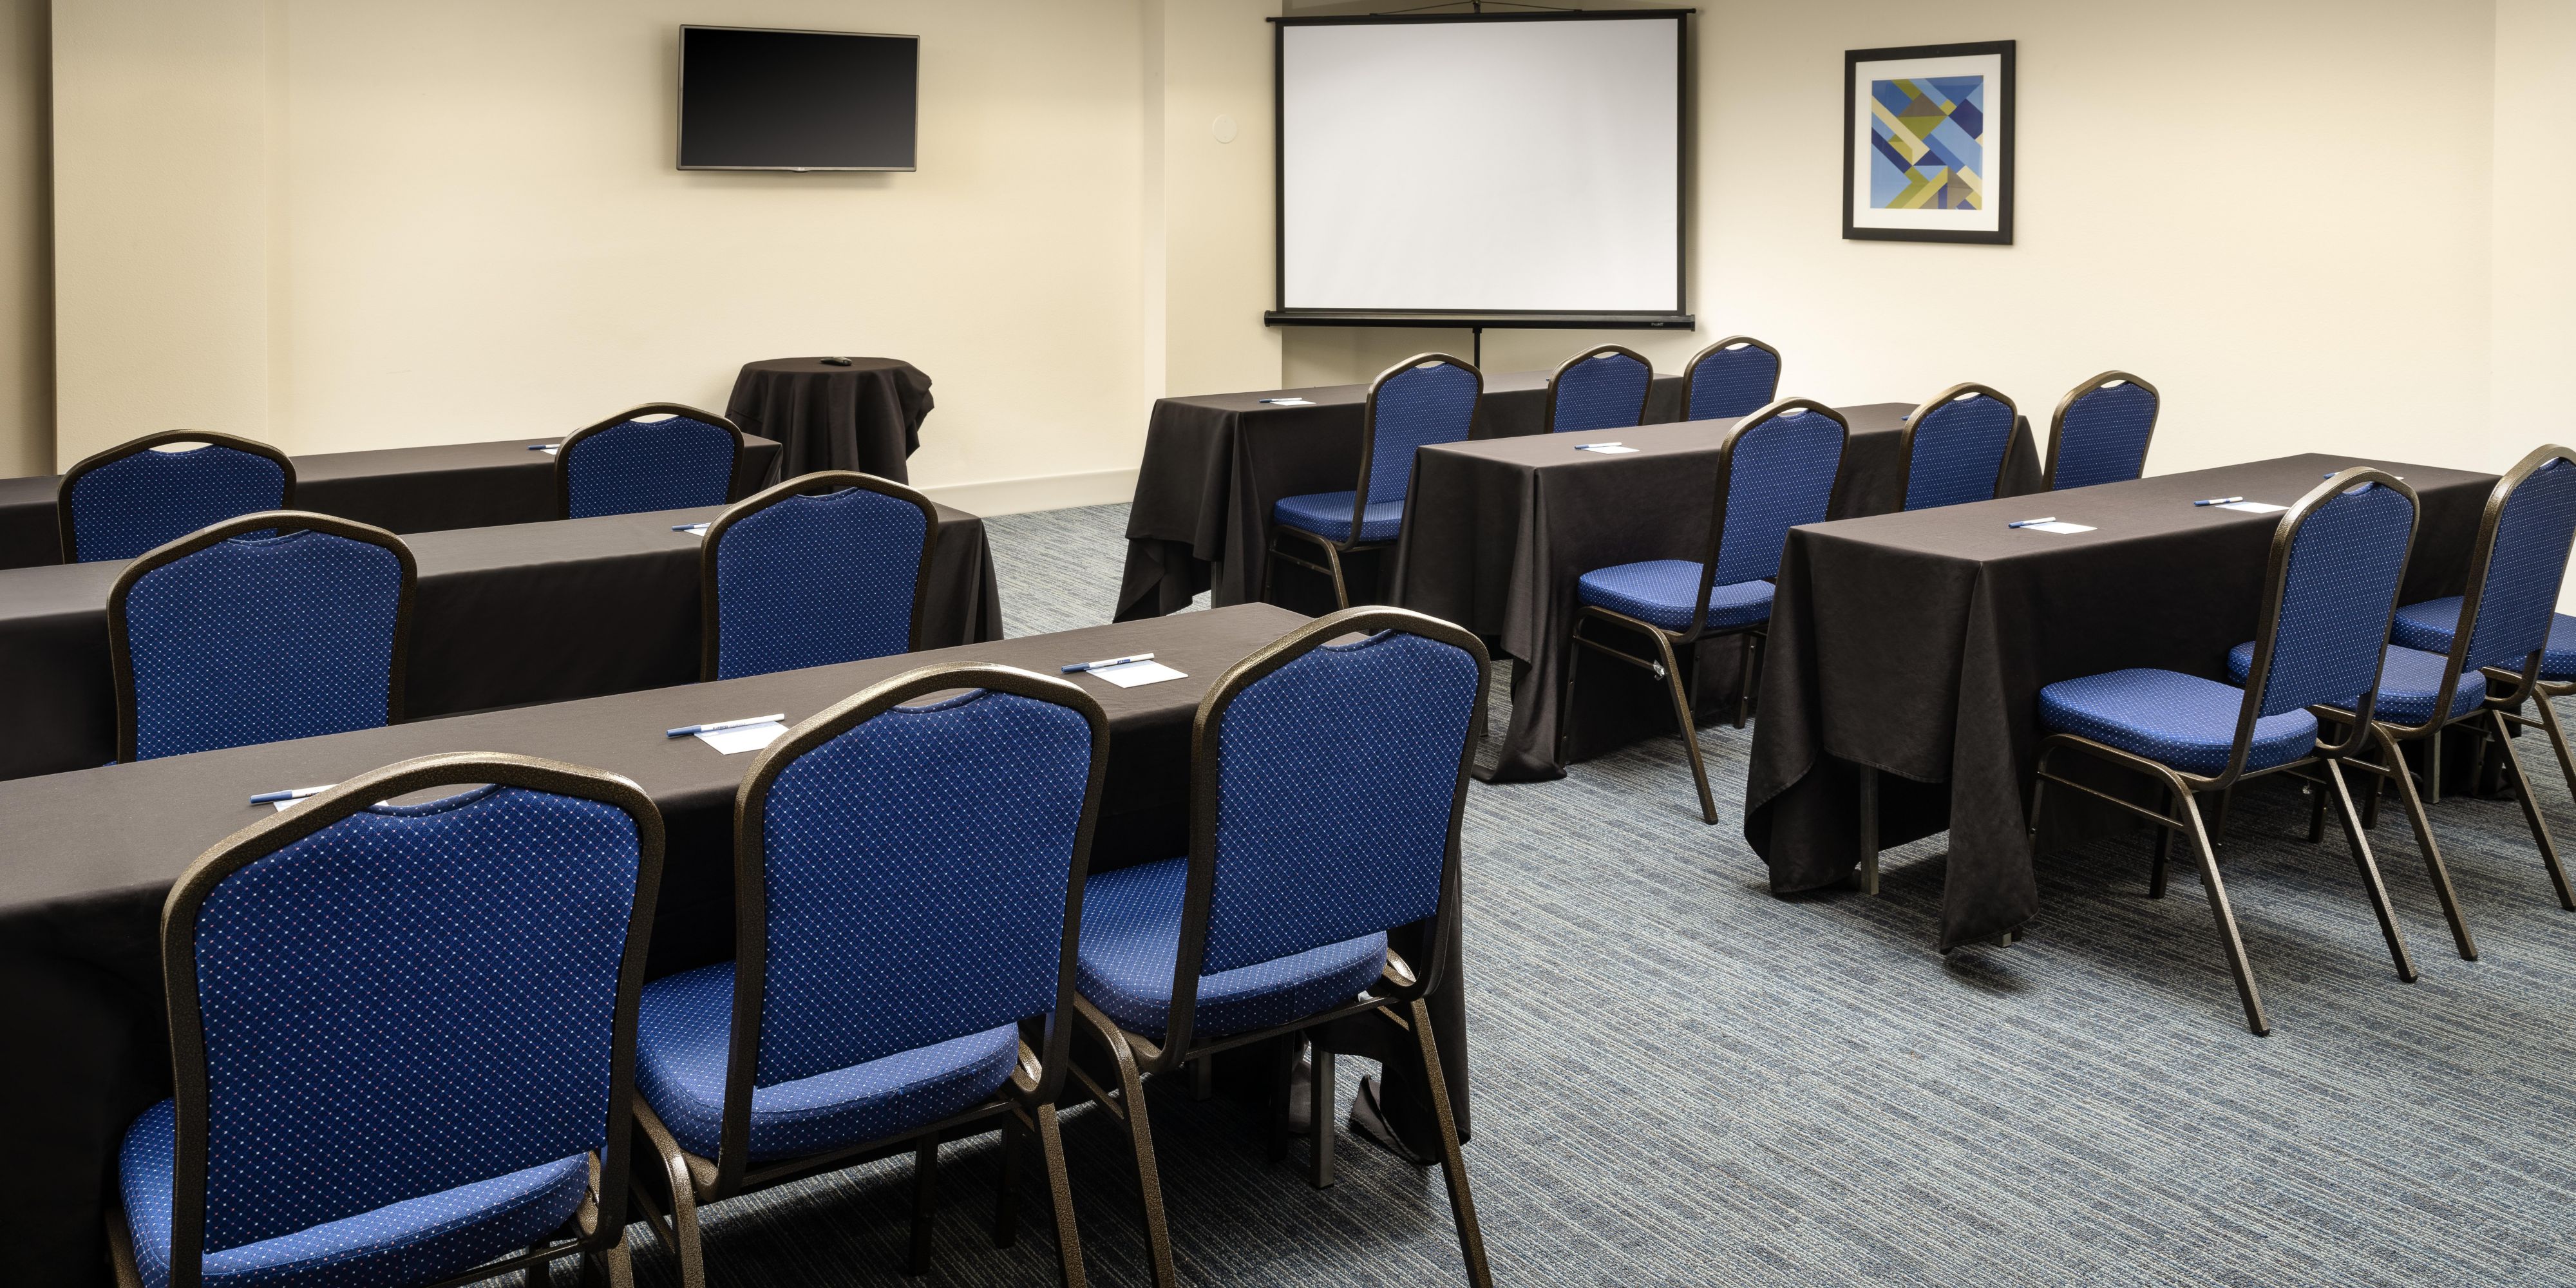 Our Ballroom is over 1400 sq ft of flexible meeting space. We can accommodate many different needs from wedding receptions, seminars, corporate meetings, family reunions and many more. Capacity is 100 people depending on set up. Contact our Sales Team for your next event.